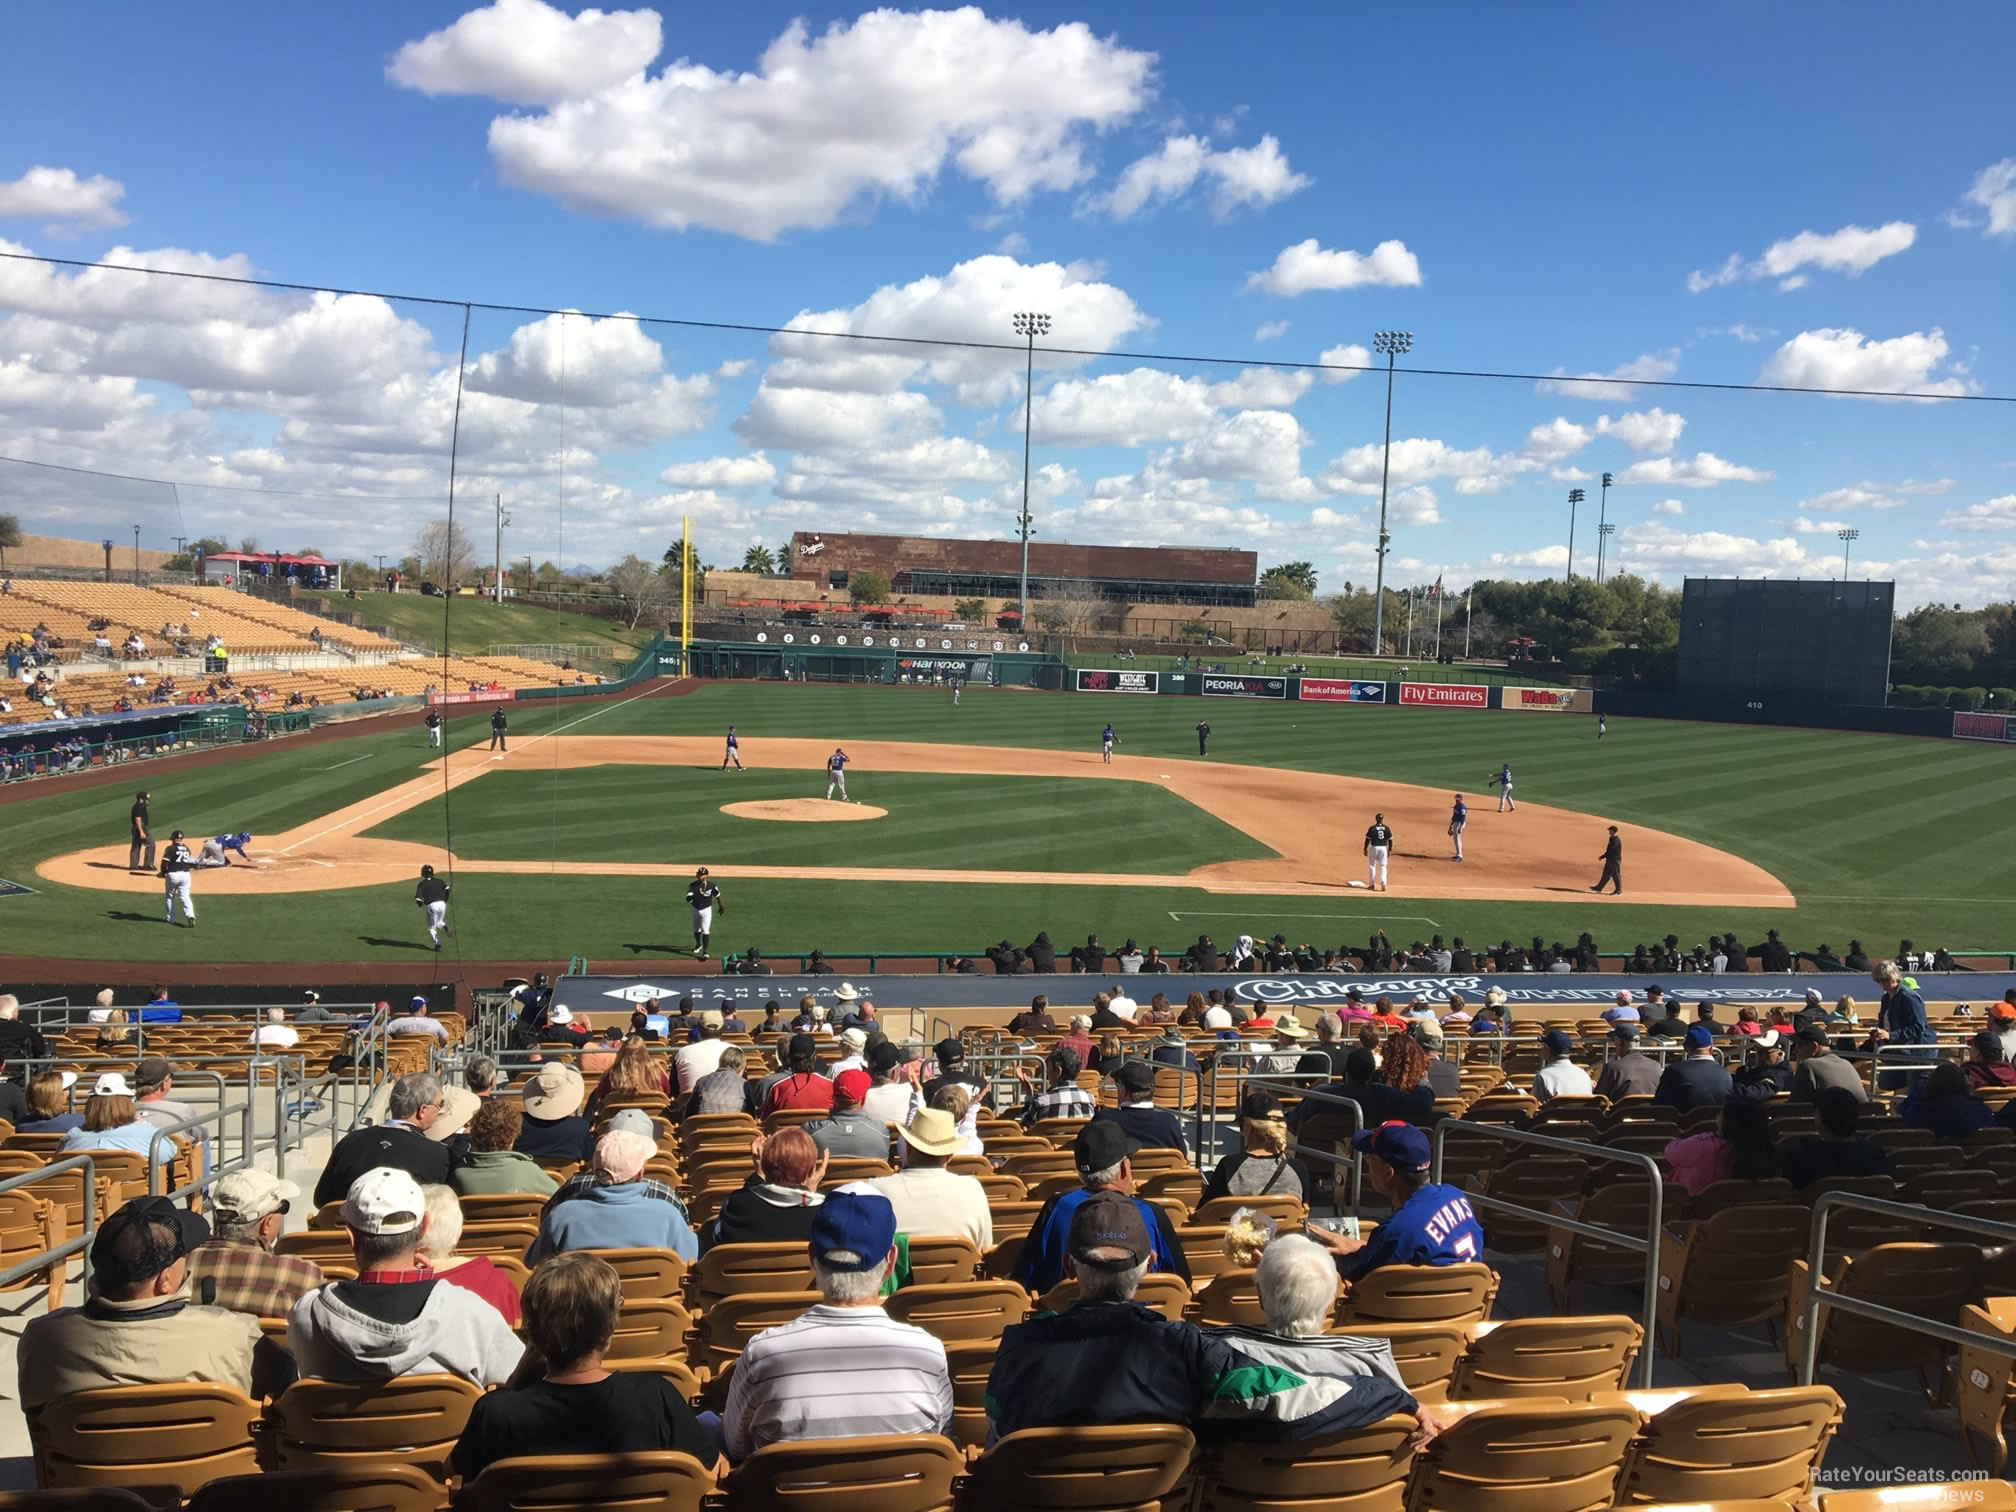 section 110, row 18 seat view  - camelback ranch